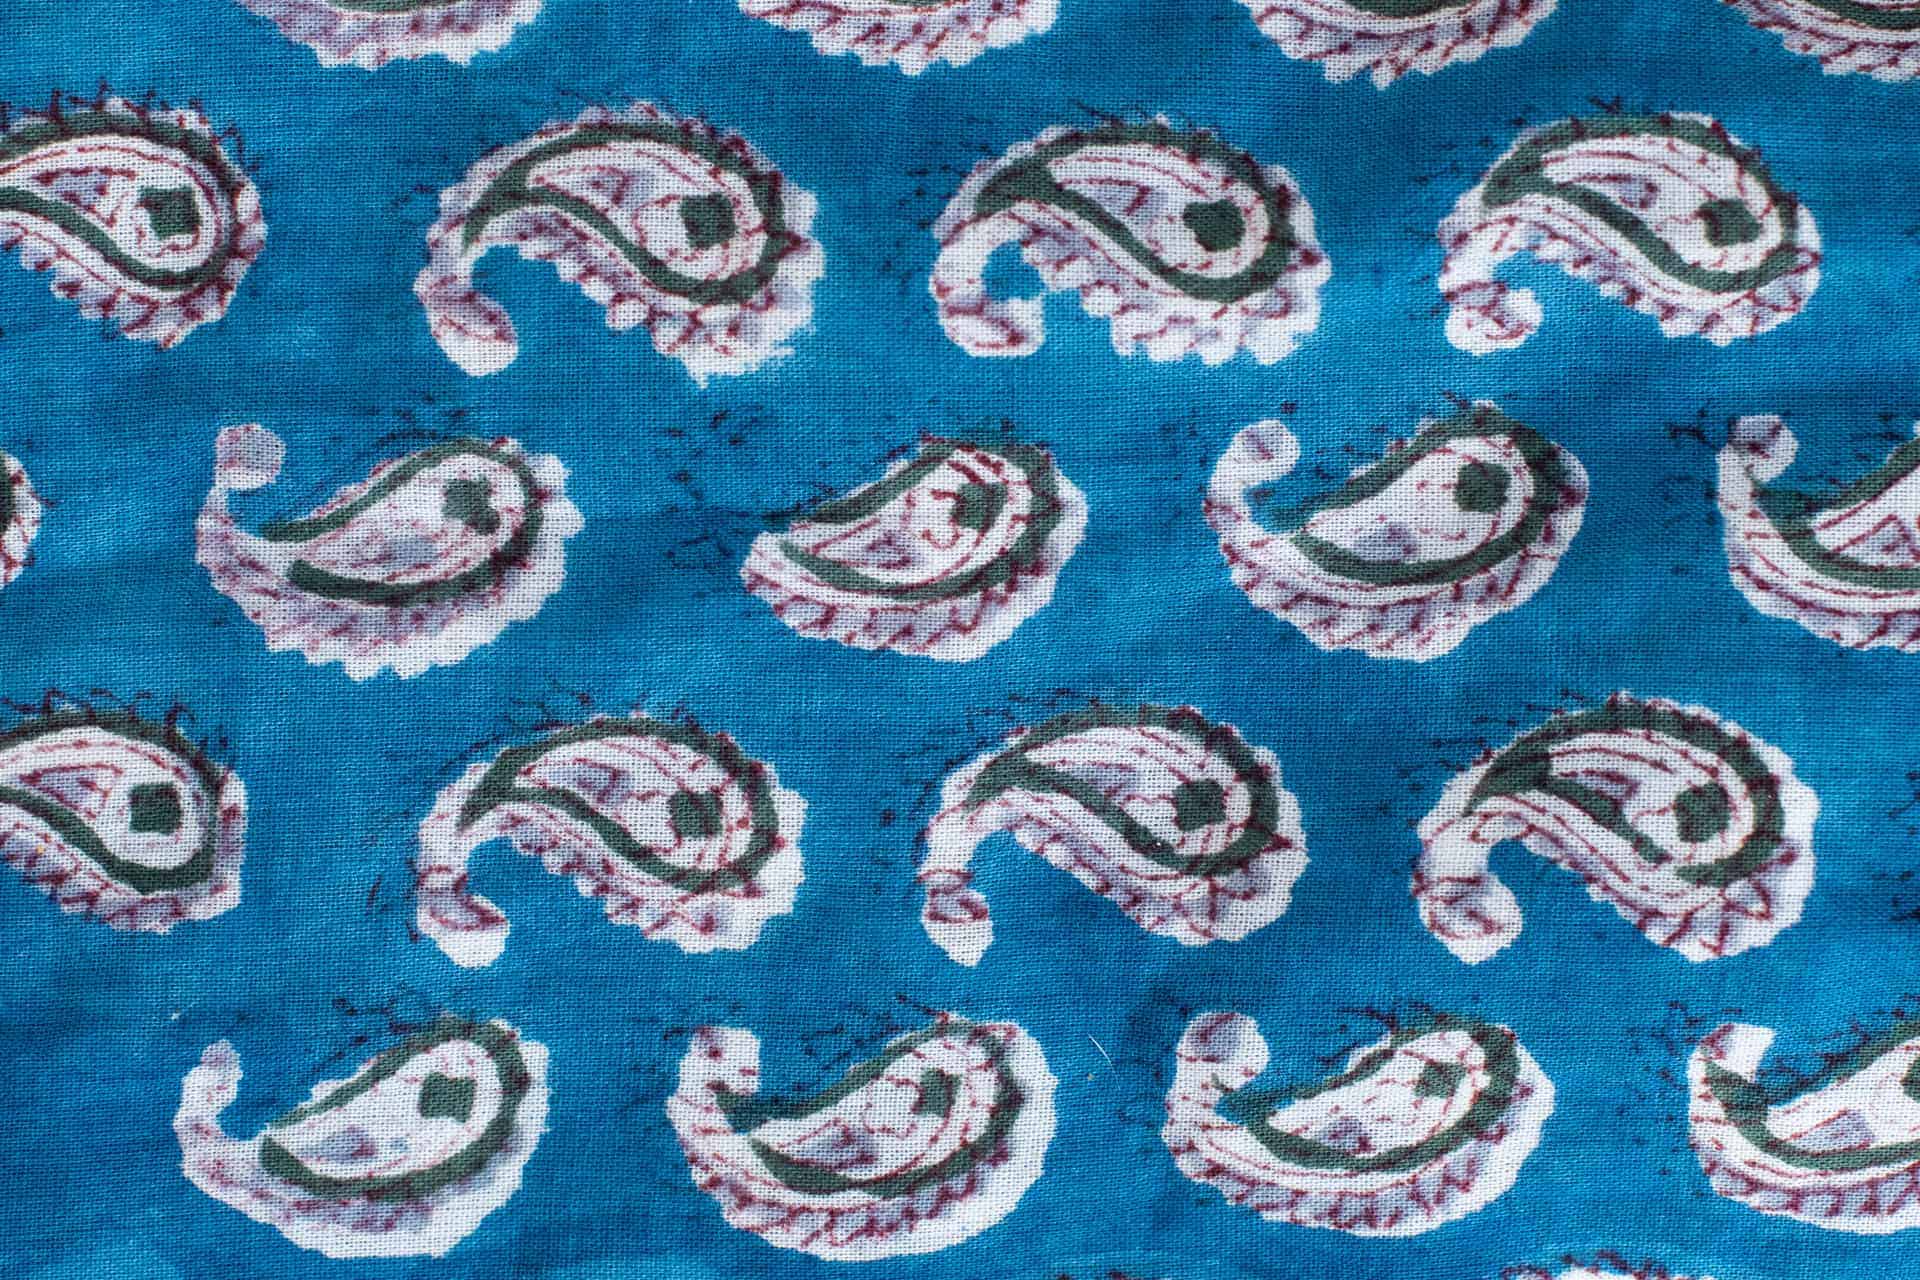 Blue and White Paisley